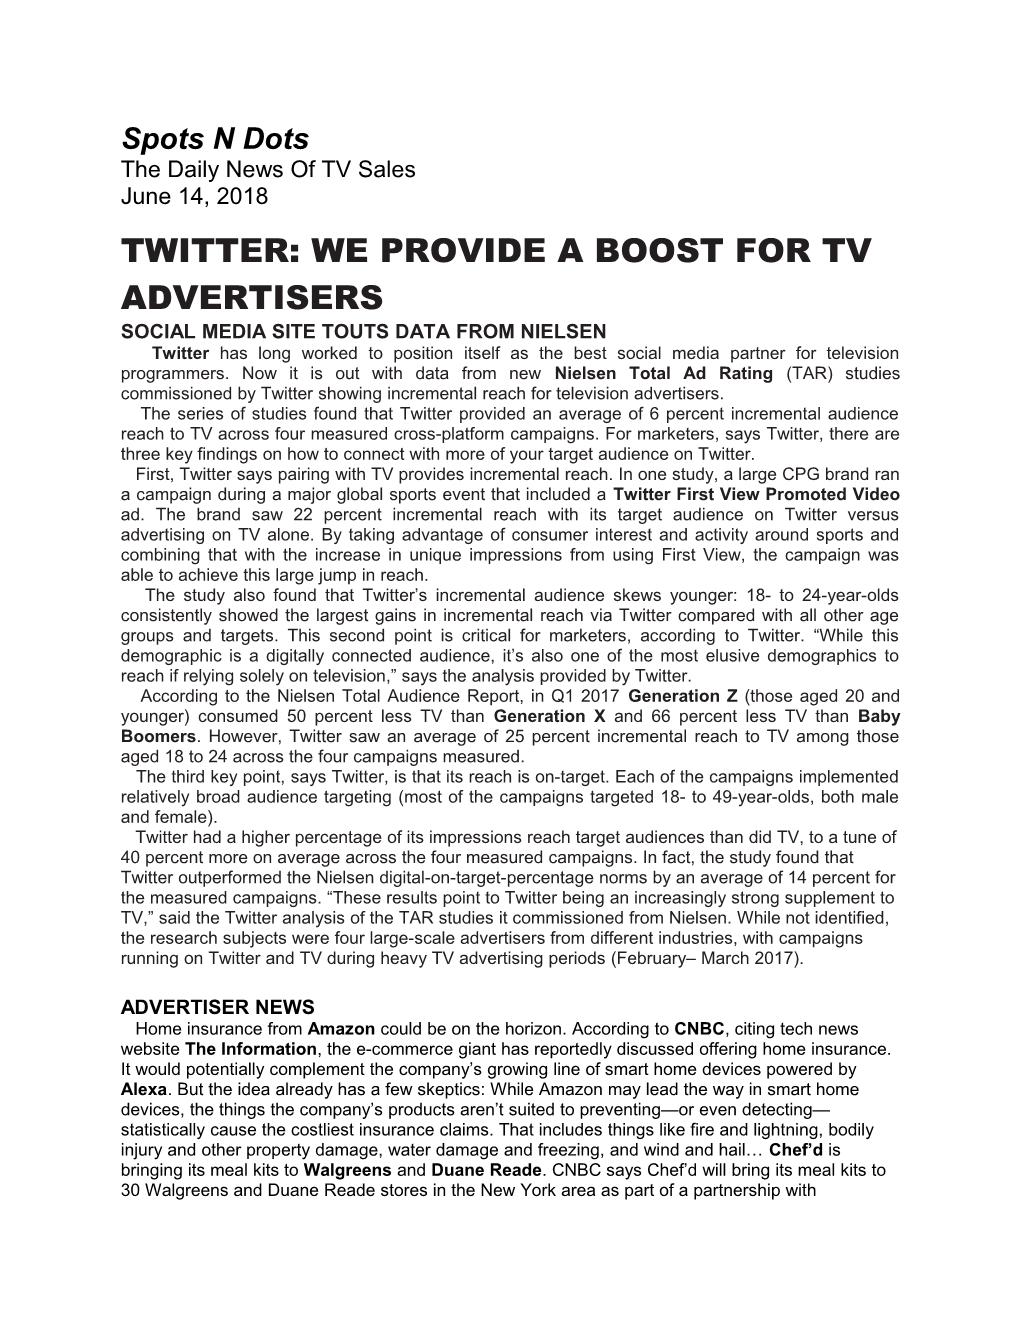 Twitter: We Provide a Boost for Tv Advertisers